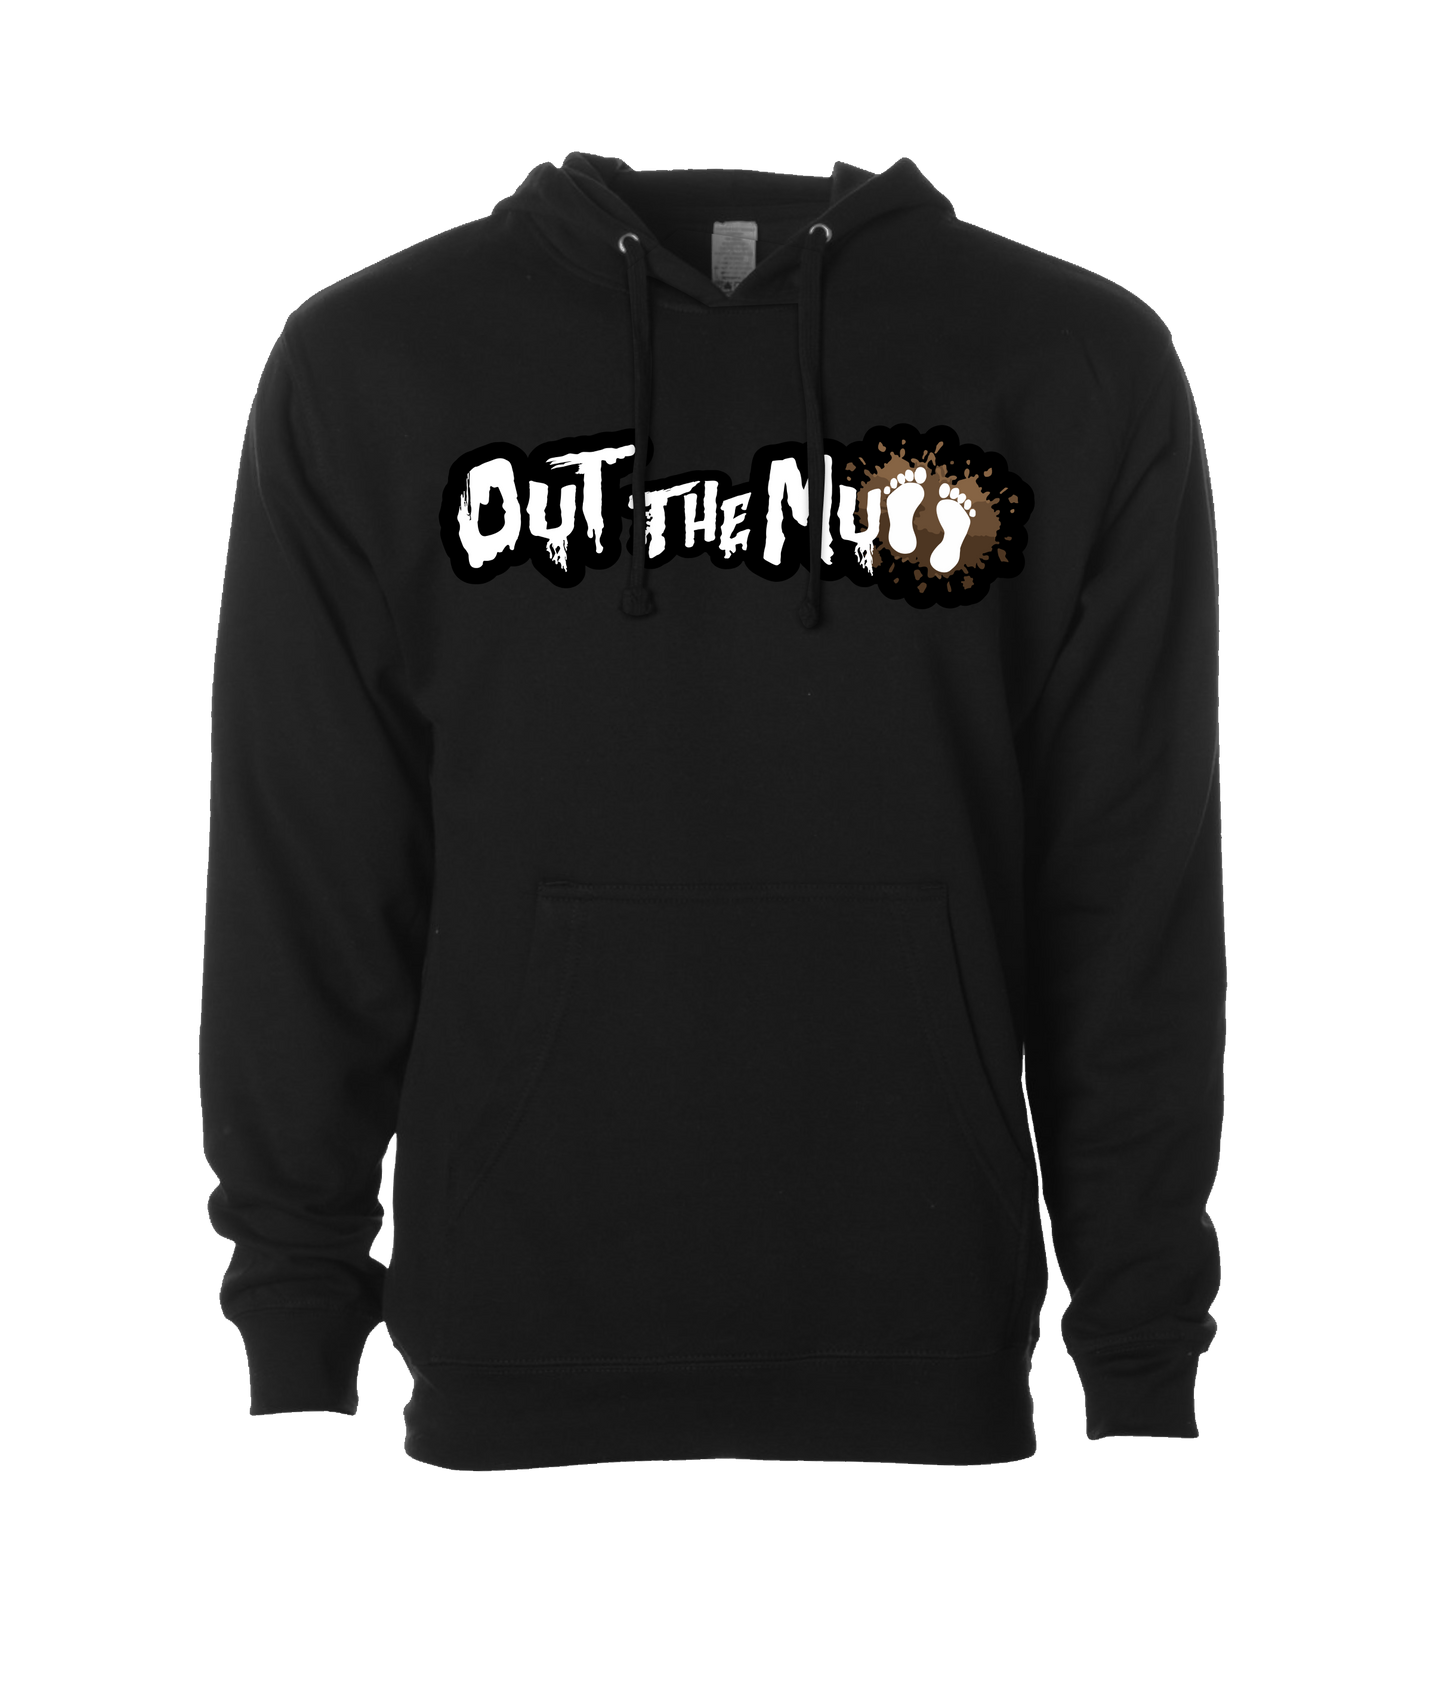 04 APPROVED
 - OUT THE MUD - Black Hoodie